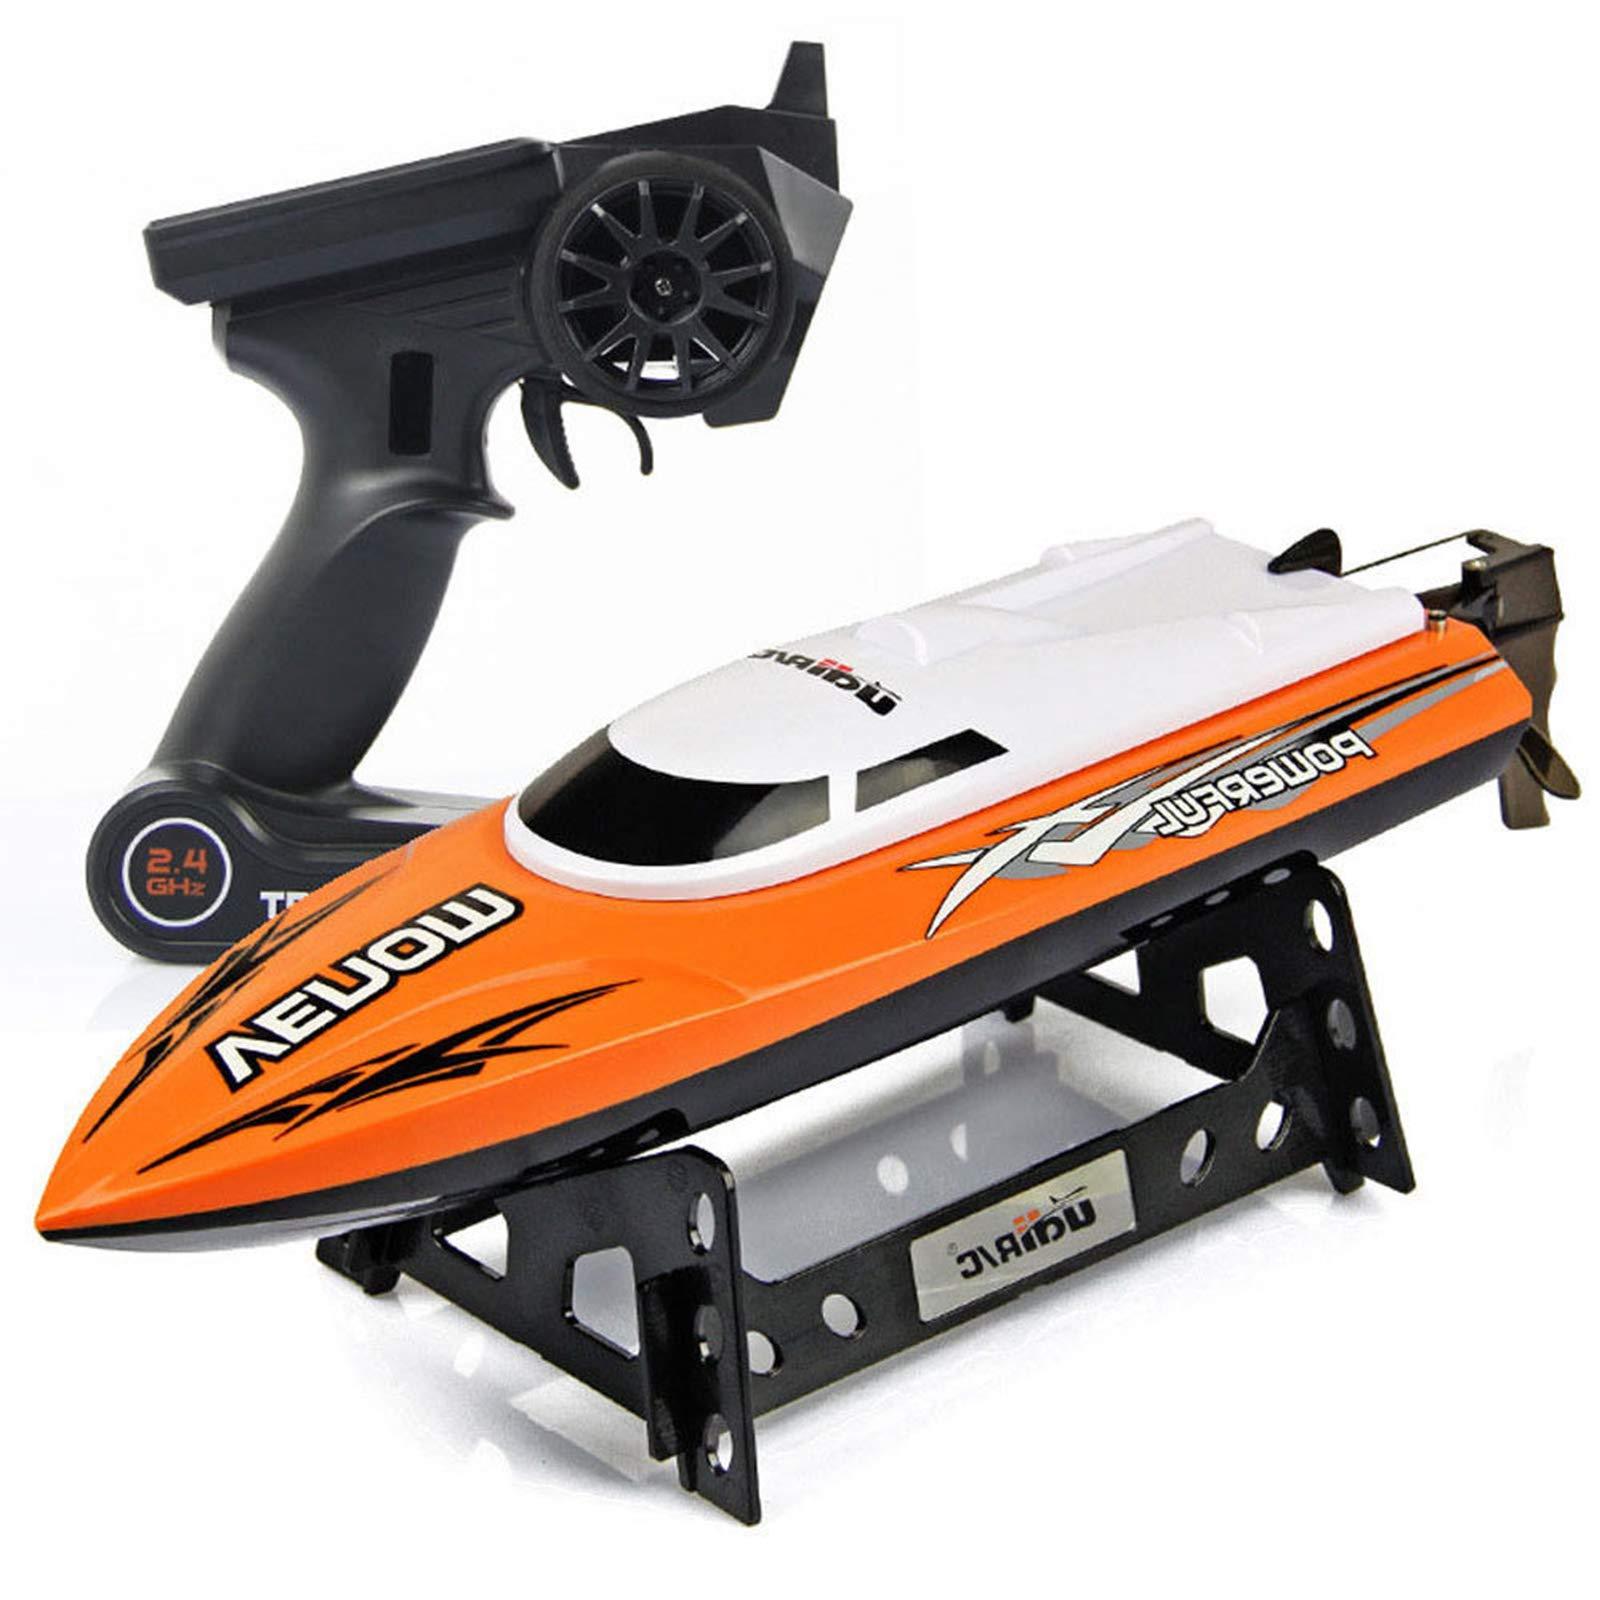 Rc Boats For Adults: Choosing the Best Type of RC Boat for Adult Hobbyists